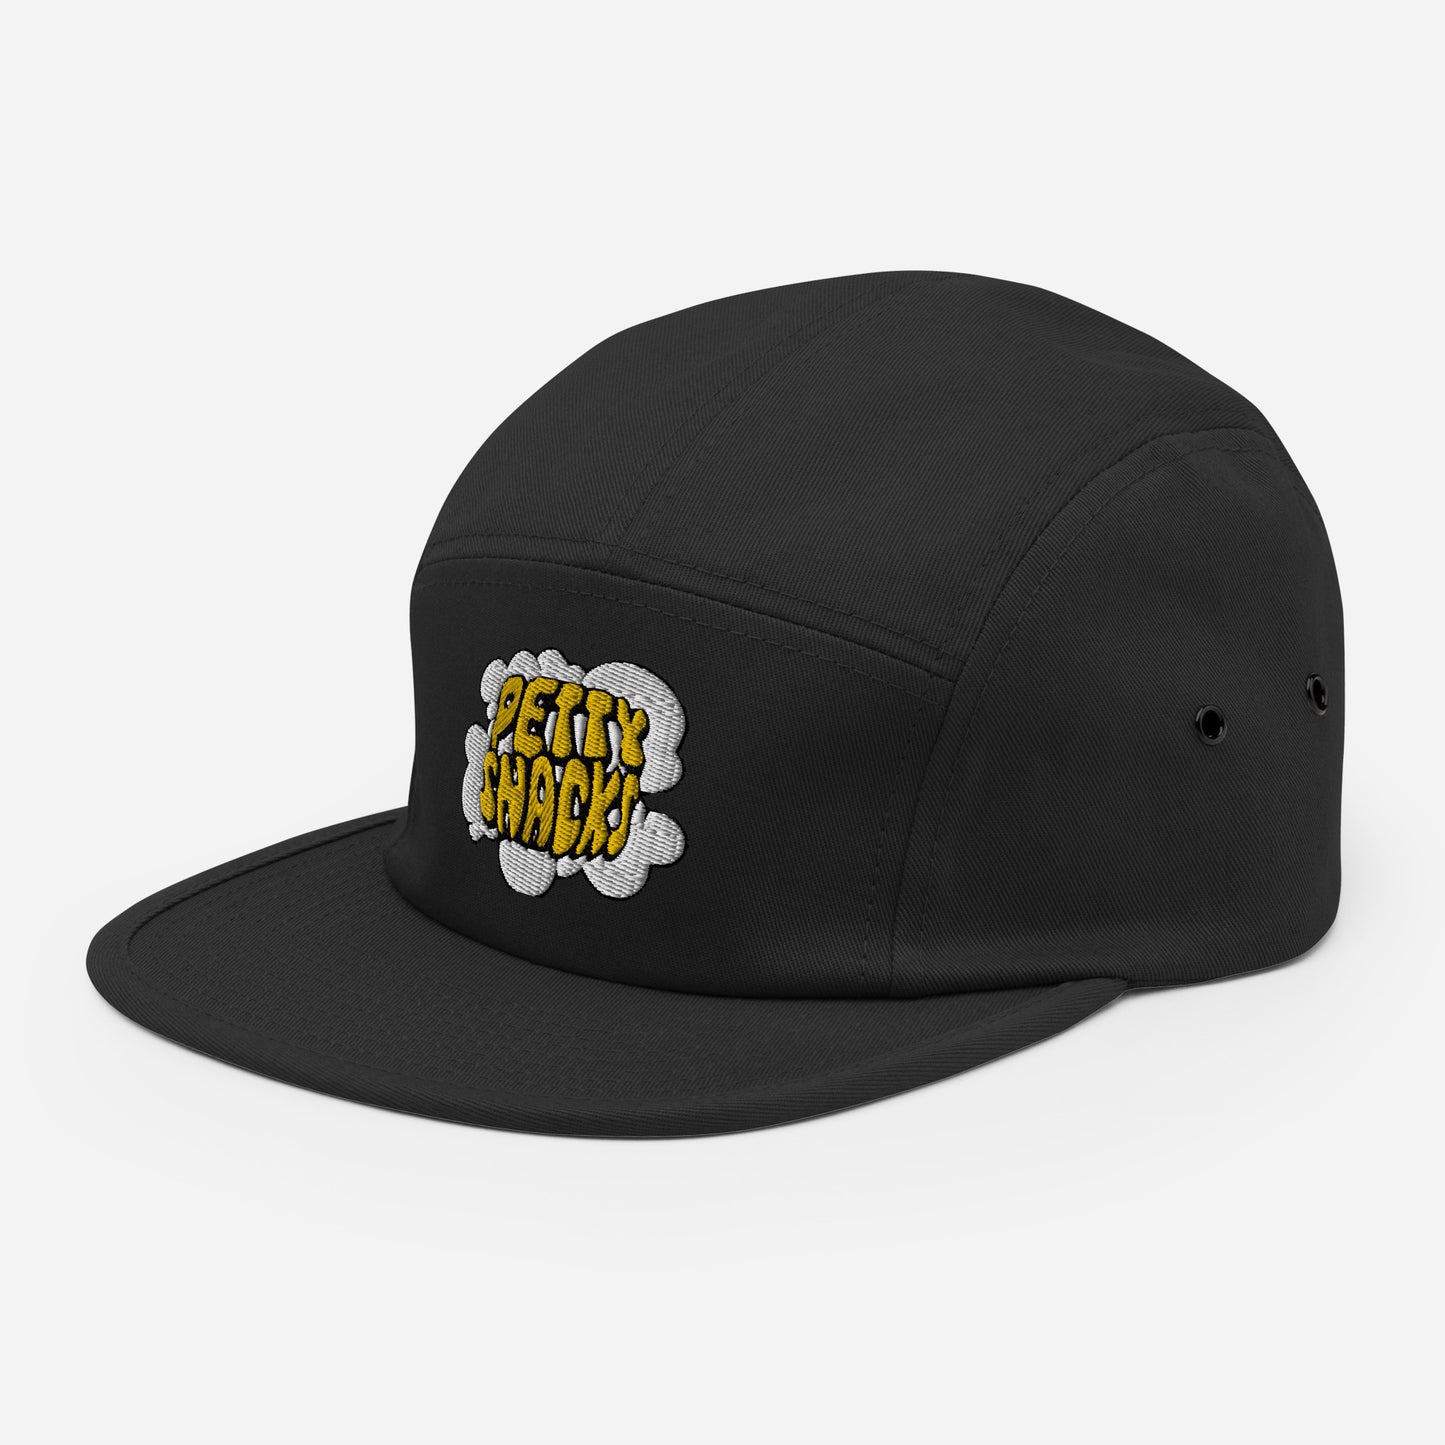 Side view of a black five panel hat, embroidery on front center. Embroidery of white smoke cloud, yellow lettering in cloud reads "Petty Snacks" with a black outline.